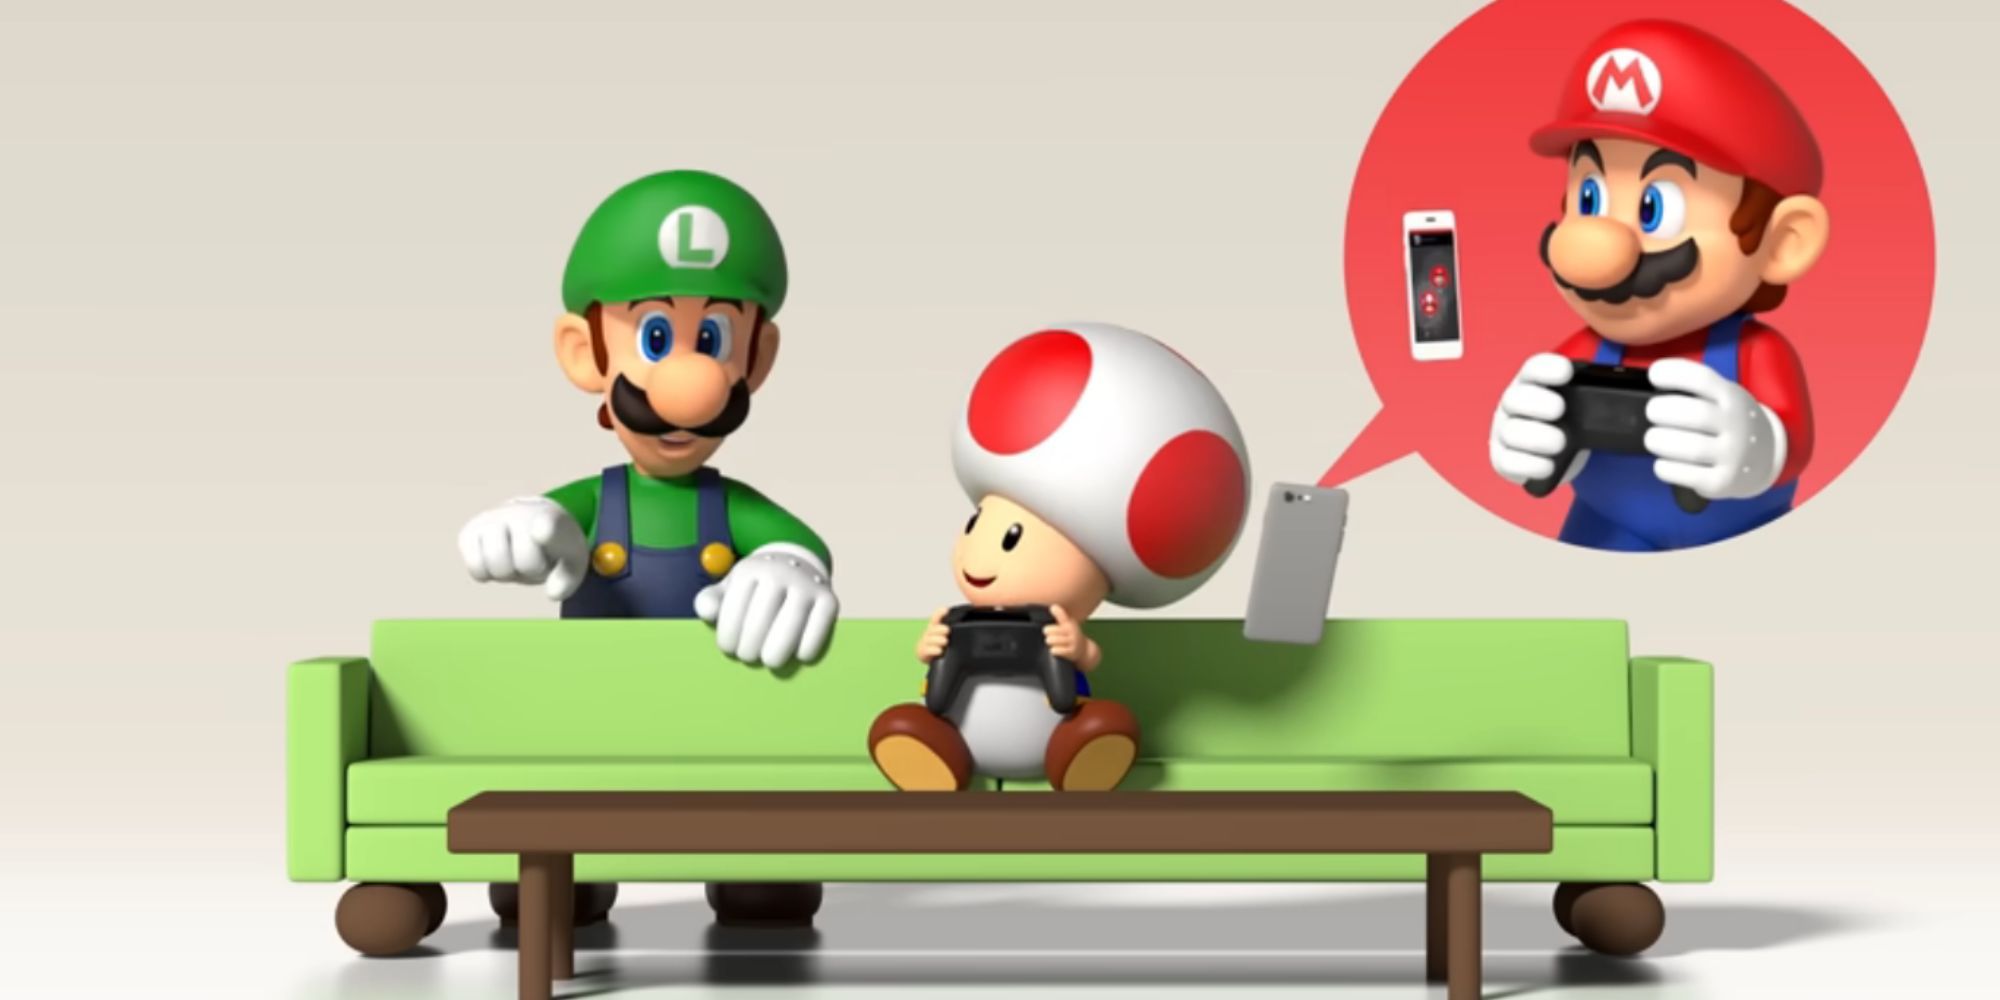 Toad plays Switch with Mario online while Luigi observes from behind a couch